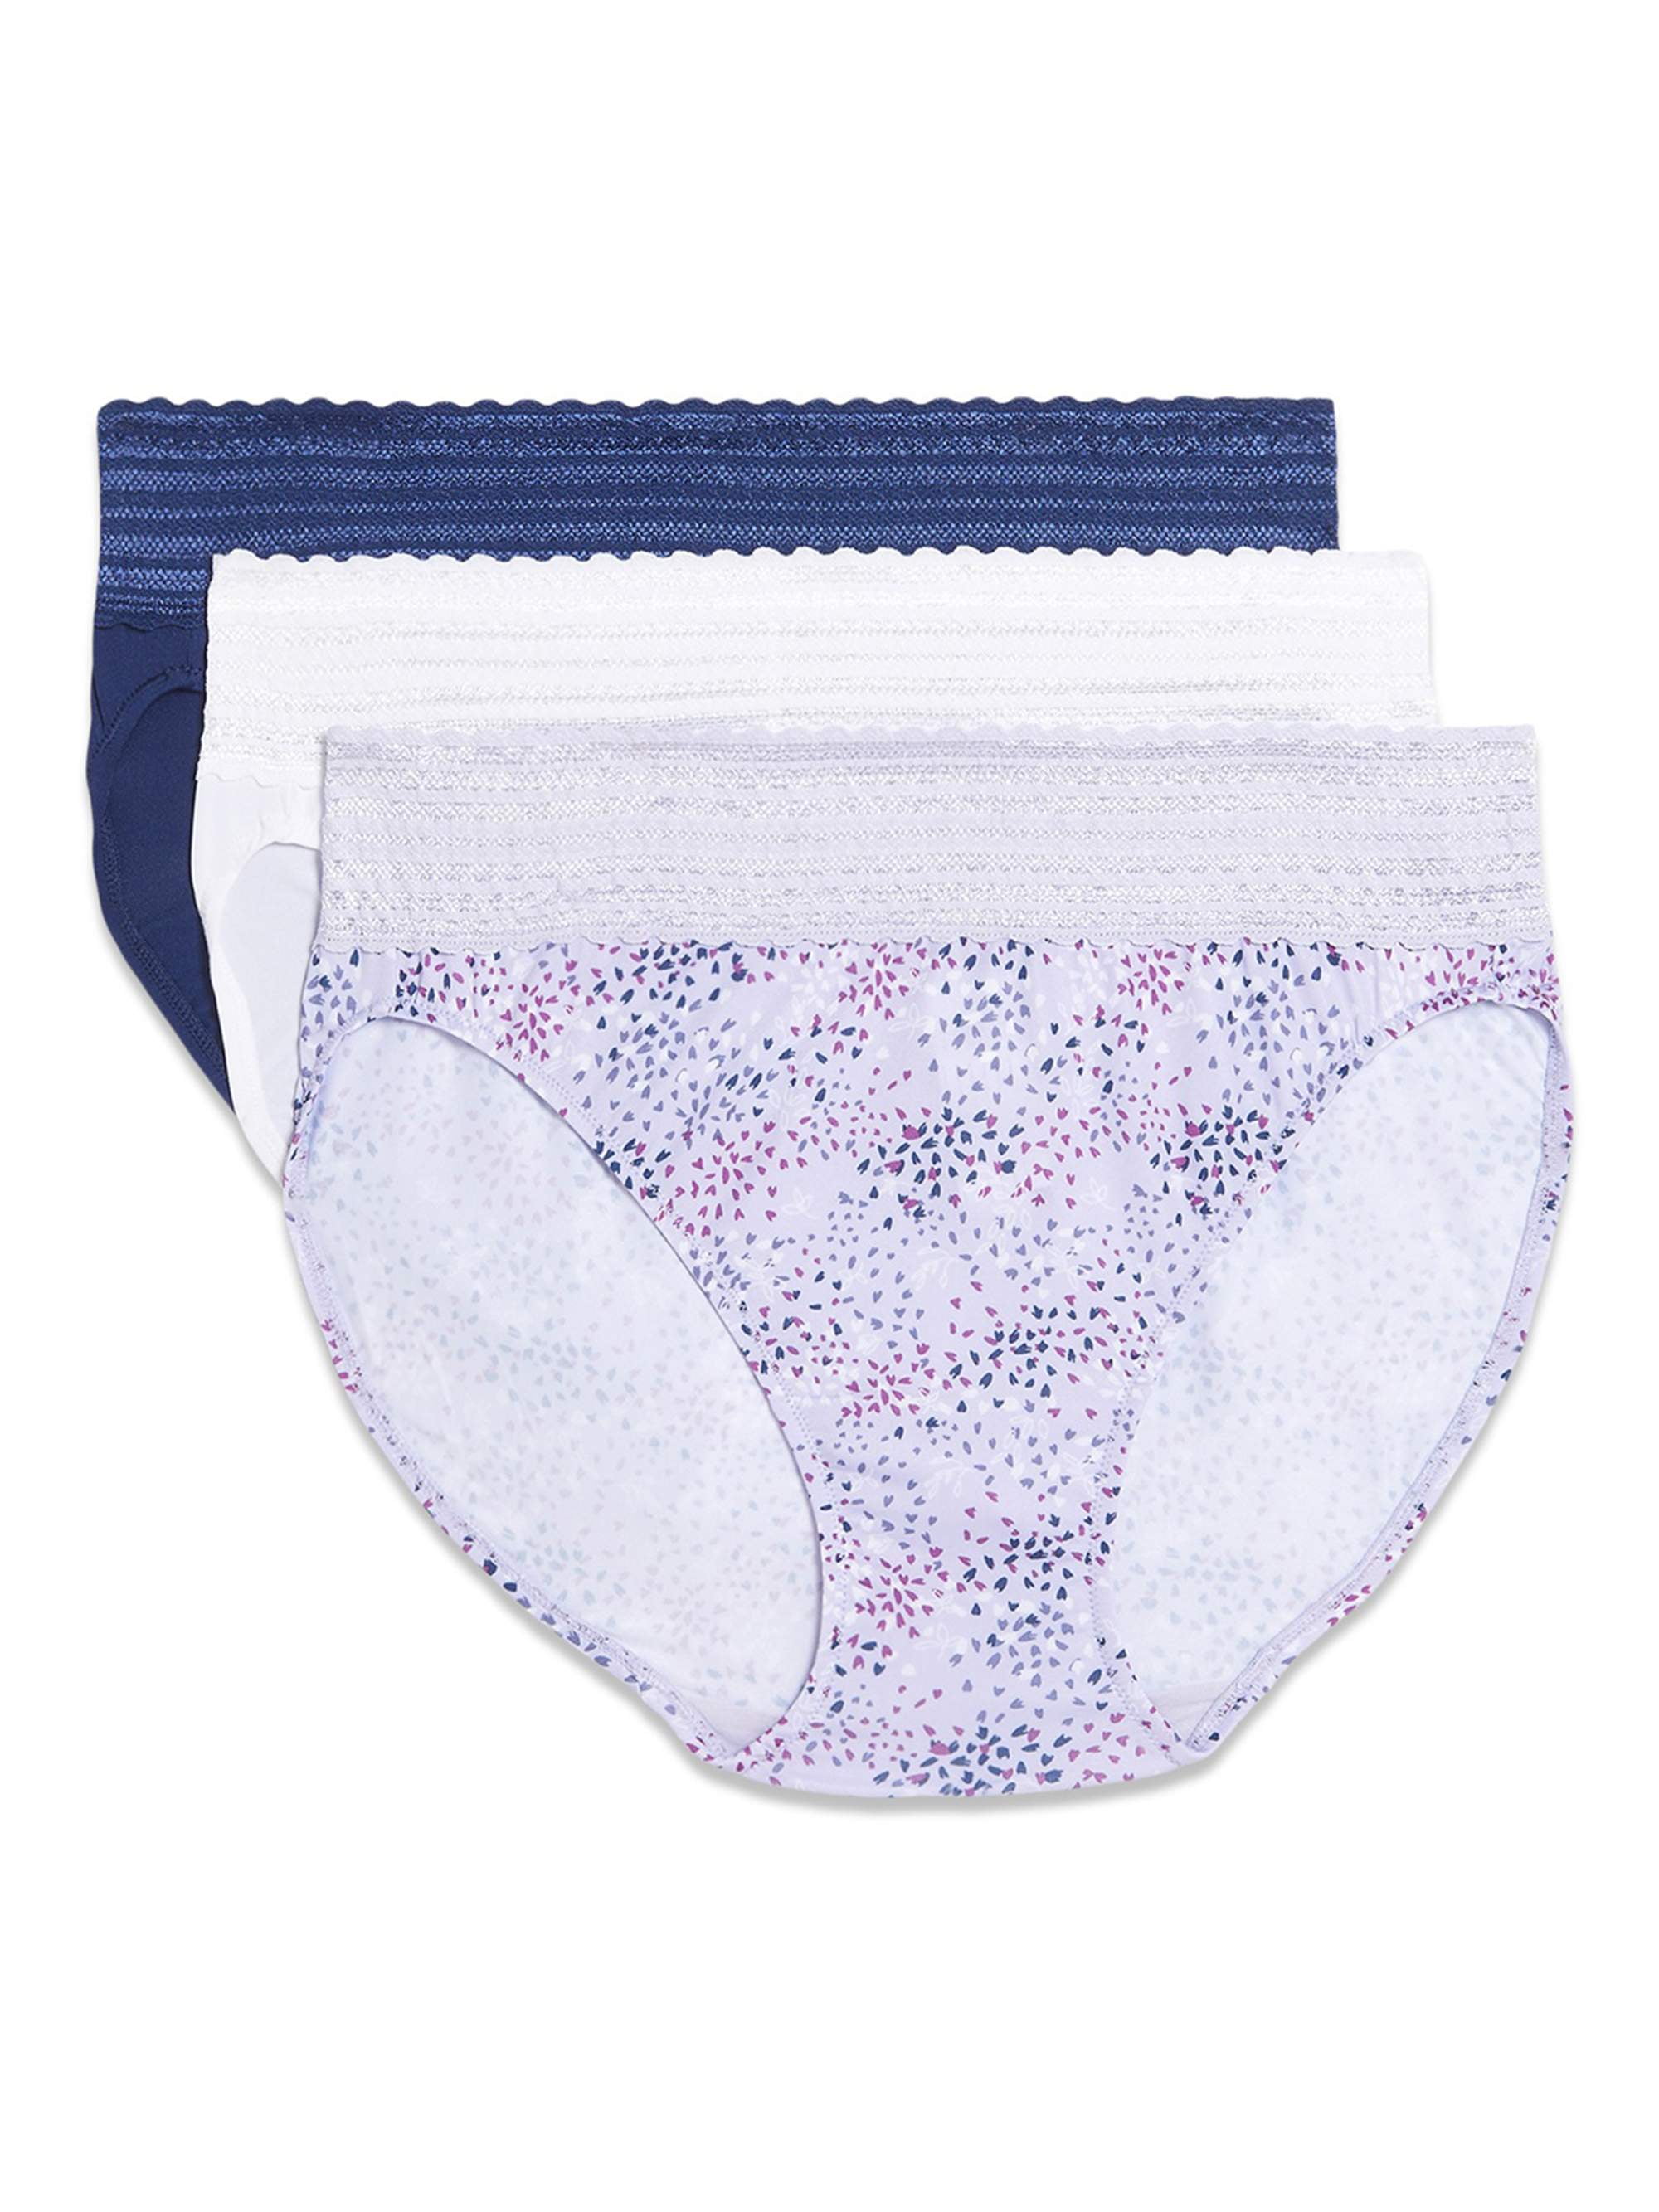 Warners® Blissful Benefits Dig-Free Comfort Waistband with Lace